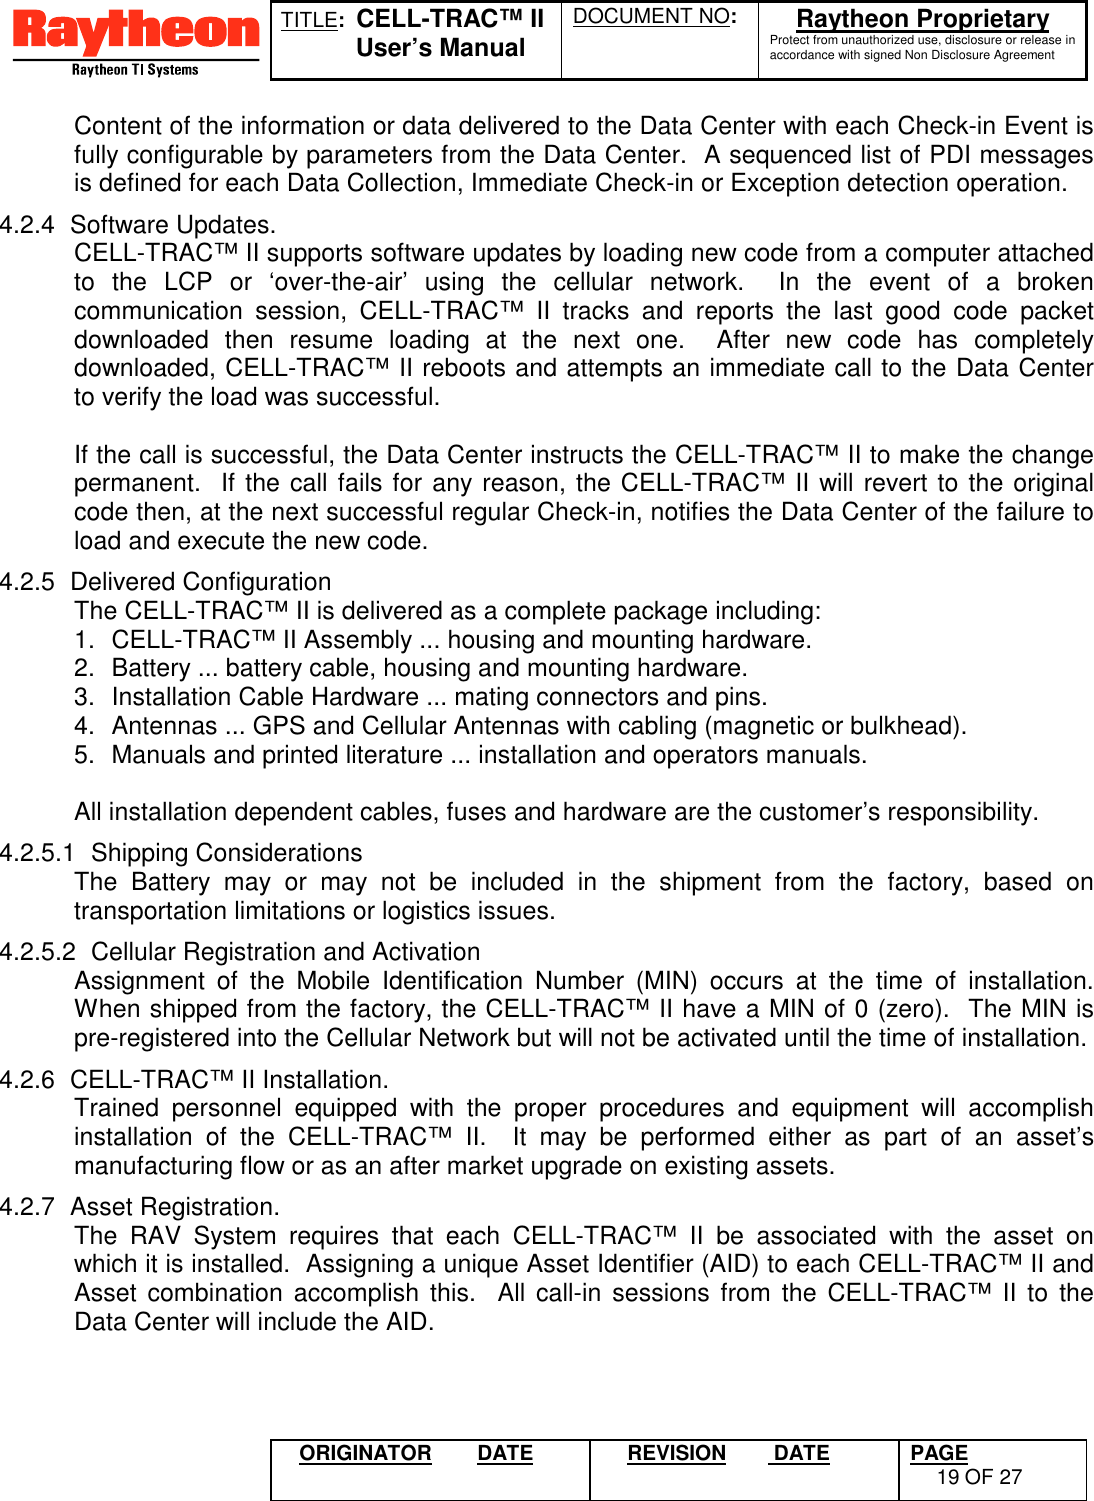 TITLE:  CELL-TRAC™ IIUser’s ManualDOCUMENT NO: Raytheon ProprietaryProtect from unauthorized use, disclosure or release inaccordance with signed Non Disclosure AgreementORIGINATOR DATE REVISION  DATE PAGE19 OF 27Content of the information or data delivered to the Data Center with each Check-in Event isfully configurable by parameters from the Data Center.  A sequenced list of PDI messagesis defined for each Data Collection, Immediate Check-in or Exception detection operation.4.2.4 Software Updates.CELL-TRAC™ II supports software updates by loading new code from a computer attachedto the LCP or ‘over-the-air’ using the cellular network.  In the event of a brokencommunication session, CELL-TRAC™ II tracks and reports the last good code packetdownloaded then resume loading at the next one.  After new code has completelydownloaded, CELL-TRAC™ II reboots and attempts an immediate call to the Data Centerto verify the load was successful.If the call is successful, the Data Center instructs the CELL-TRAC™ II to make the changepermanent.  If the call fails for any reason, the CELL-TRAC™ II will revert to the originalcode then, at the next successful regular Check-in, notifies the Data Center of the failure toload and execute the new code.4.2.5 Delivered ConfigurationThe CELL-TRAC™ II is delivered as a complete package including:1.  CELL-TRAC™ II Assembly ... housing and mounting hardware.2.  Battery ... battery cable, housing and mounting hardware.3.  Installation Cable Hardware ... mating connectors and pins.4.  Antennas ... GPS and Cellular Antennas with cabling (magnetic or bulkhead).5.  Manuals and printed literature ... installation and operators manuals.All installation dependent cables, fuses and hardware are the customer’s responsibility.4.2.5.1 Shipping ConsiderationsThe Battery may or may not be included in the shipment from the factory, based ontransportation limitations or logistics issues.4.2.5.2  Cellular Registration and ActivationAssignment of the Mobile Identification Number (MIN) occurs at the time of installation.When shipped from the factory, the CELL-TRAC™ II have a MIN of 0 (zero).  The MIN ispre-registered into the Cellular Network but will not be activated until the time of installation.4.2.6  CELL-TRAC™ II Installation.Trained personnel equipped with the proper procedures and equipment will accomplishinstallation of the CELL-TRAC™ II.  It may be performed either as part of an asset’smanufacturing flow or as an after market upgrade on existing assets.4.2.7 Asset Registration.The RAV System requires that each CELL-TRAC™ II be associated with the asset onwhich it is installed.  Assigning a unique Asset Identifier (AID) to each CELL-TRAC™ II andAsset combination accomplish this.  All call-in sessions from the CELL-TRAC™ II to theData Center will include the AID.